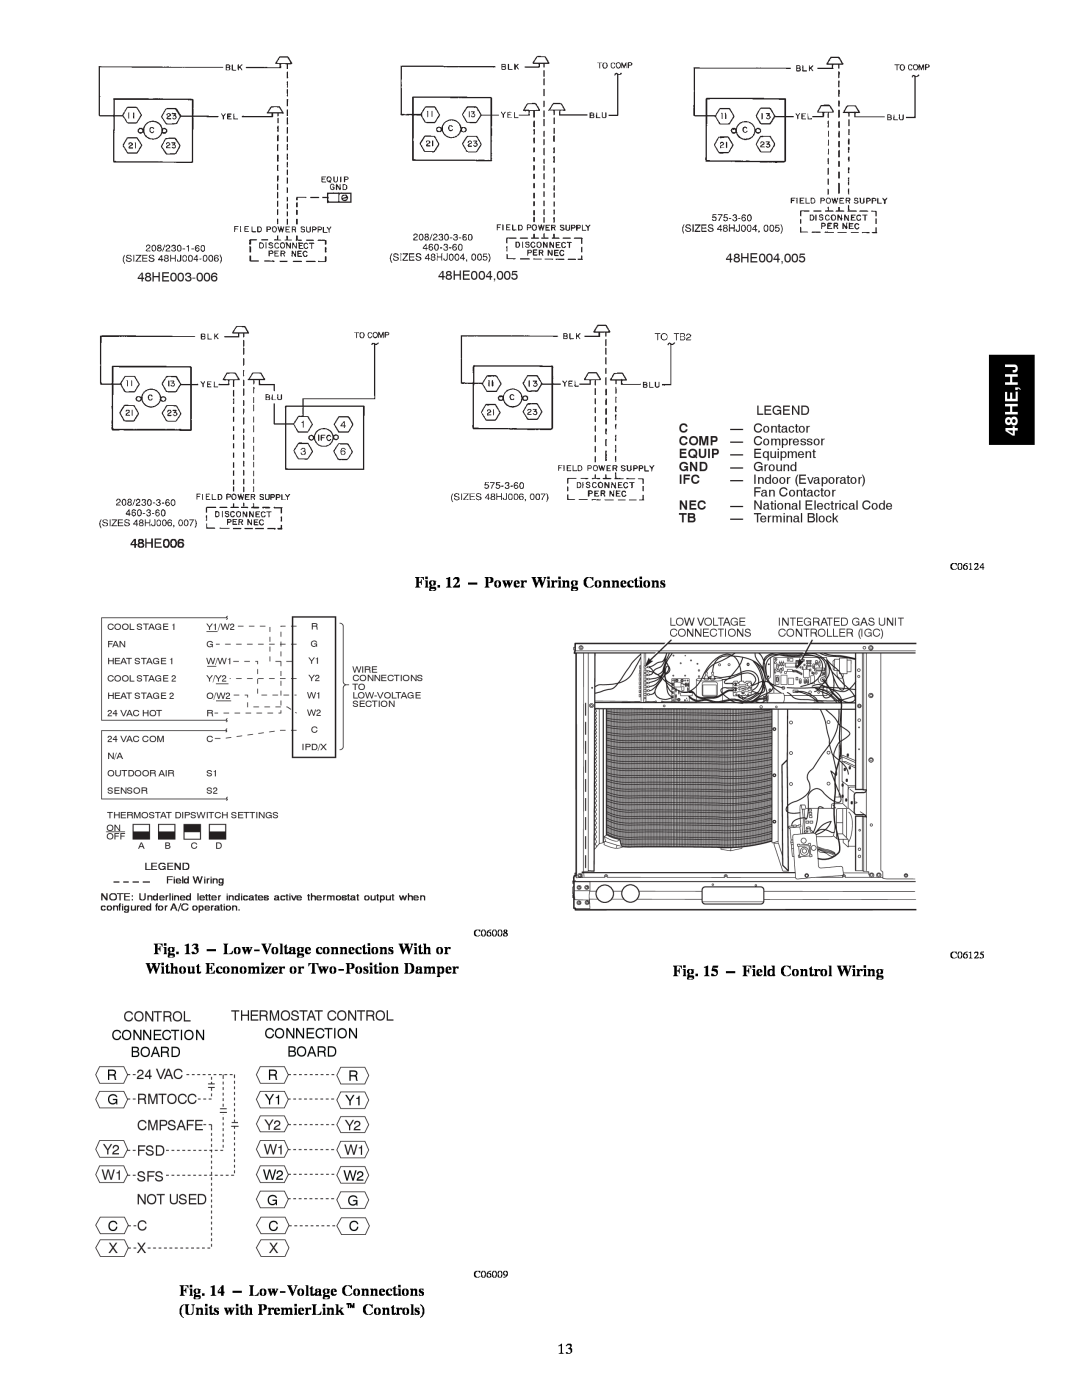 Carrier 48HJ004---007 48HE,HJ, Power Wiring Connections, Field Control Wiring, Thermostat Control, Board, 24 VAC, Rmtocc 